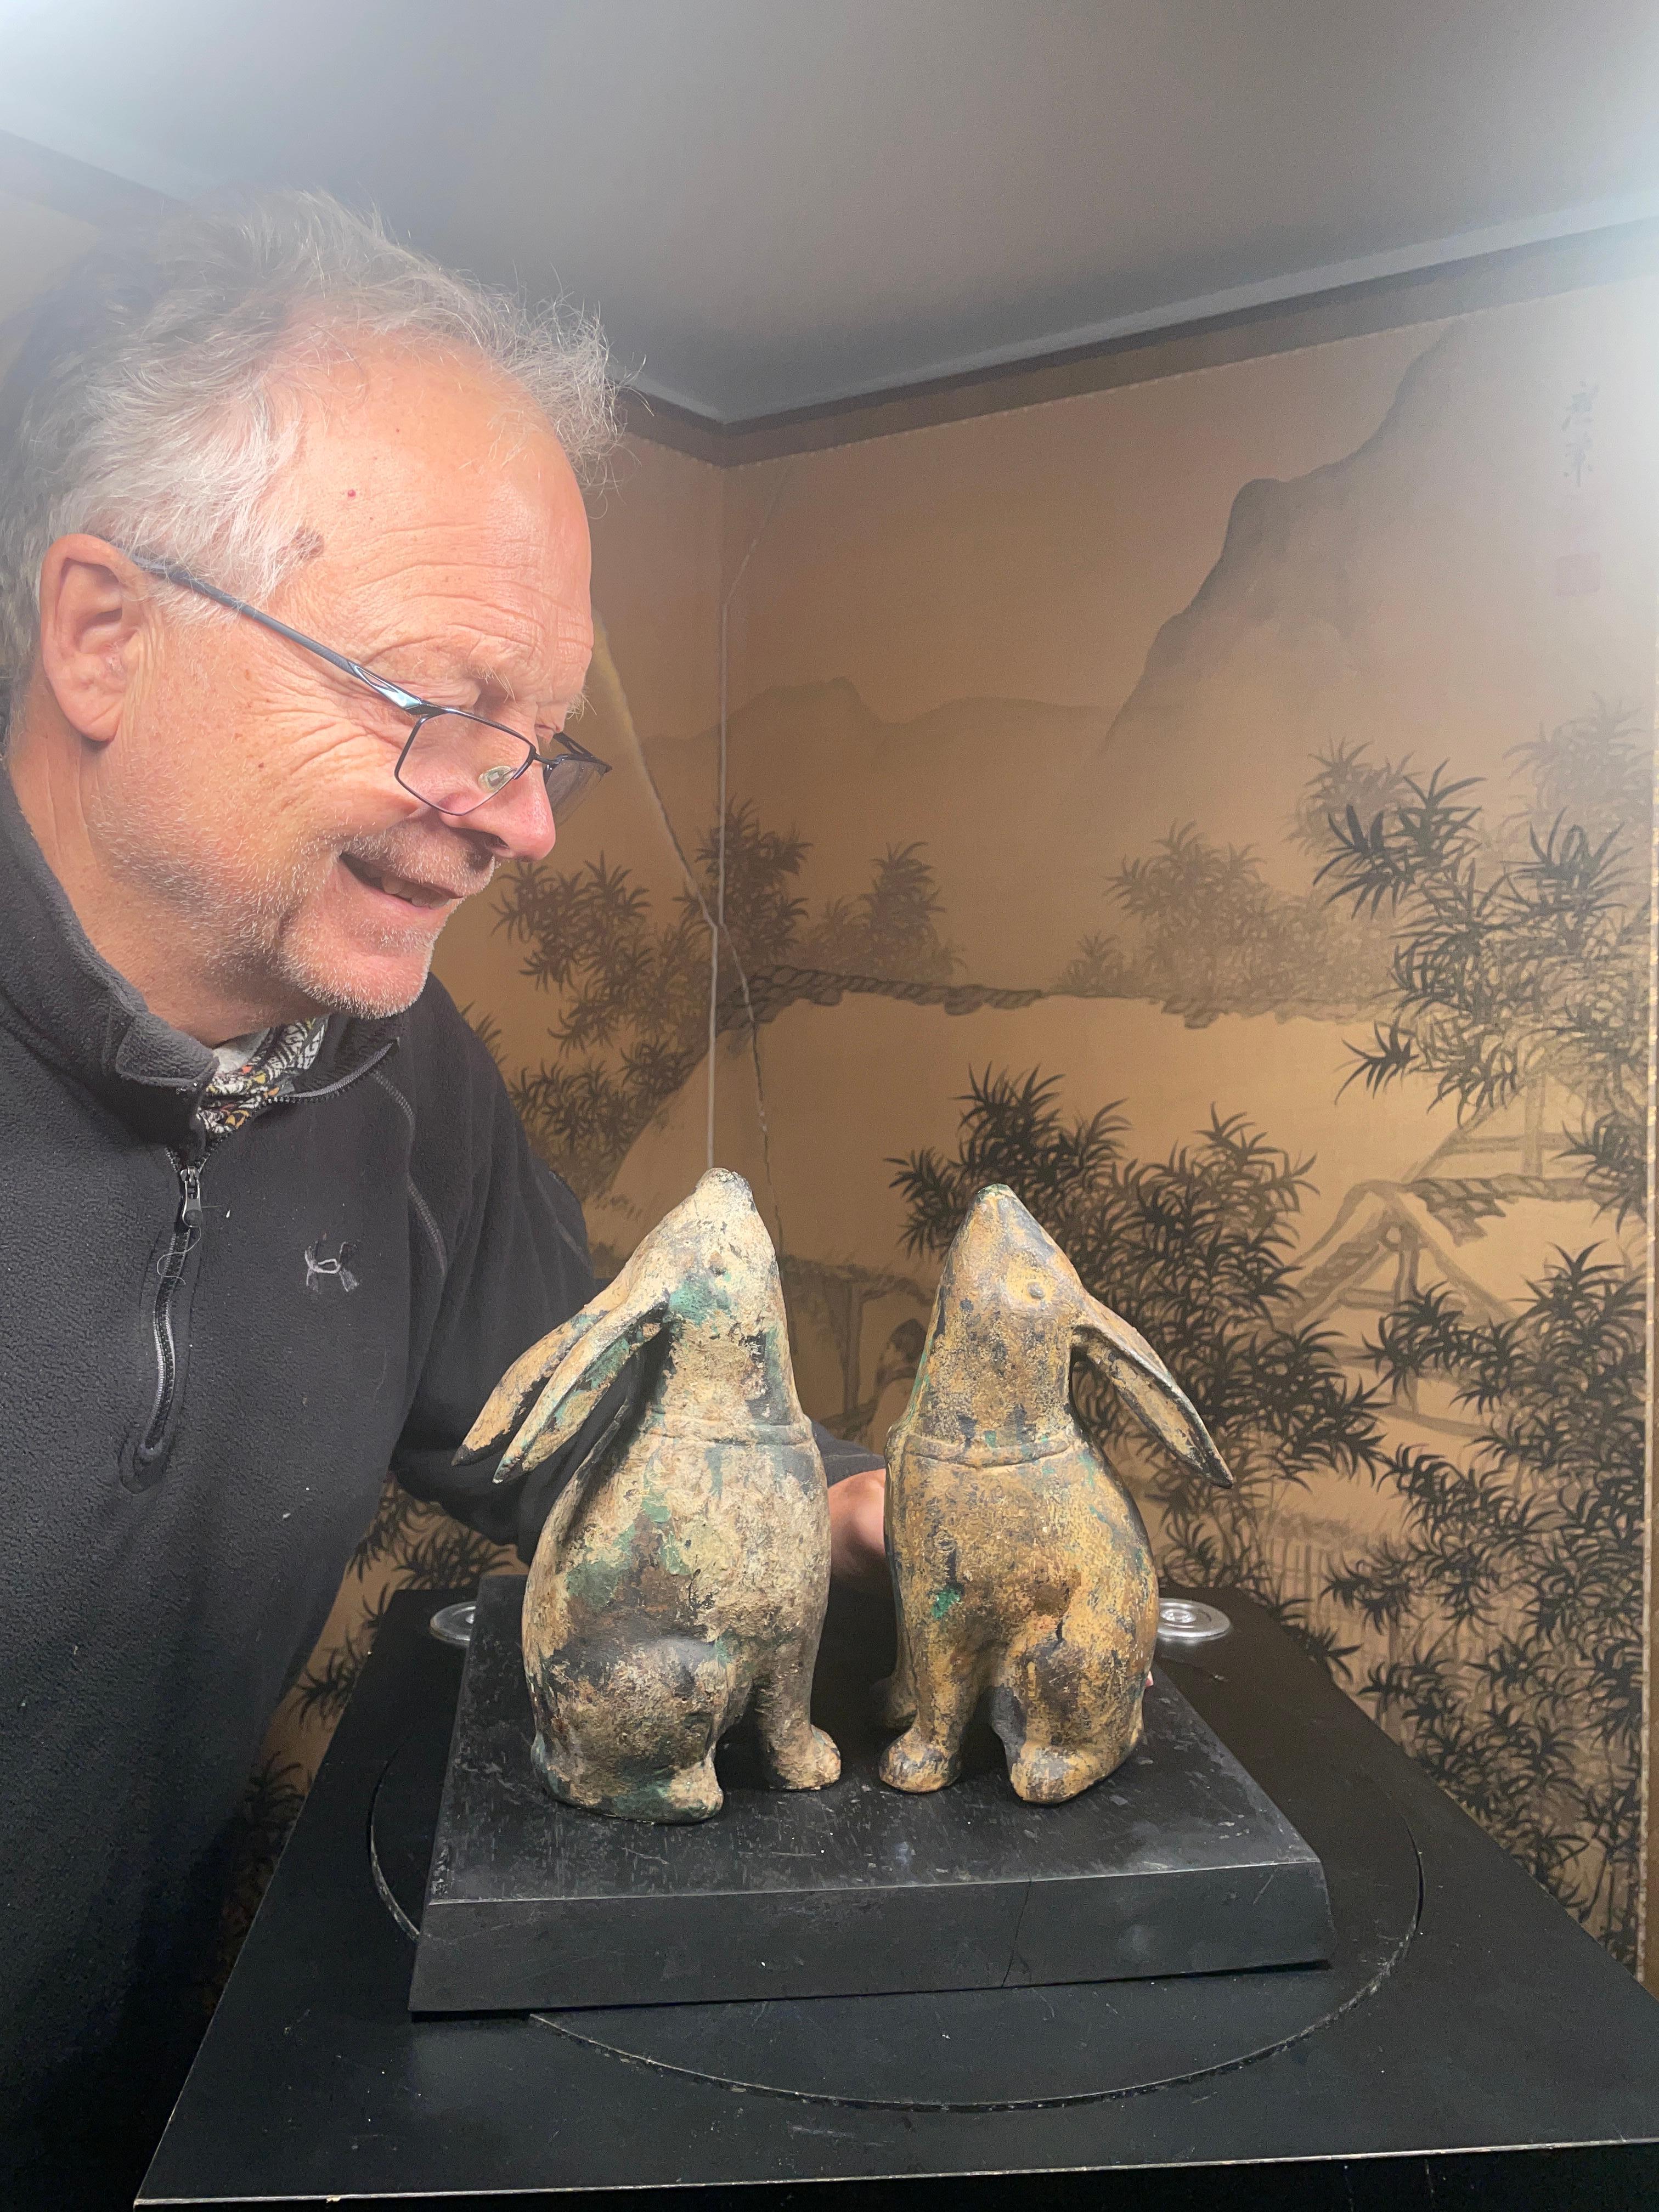 For your special garden spot - rare pair Moon Gazing Rabbits from Japan! 

This is a hard to find pair (2) of solid and finely cast effigies of tall 